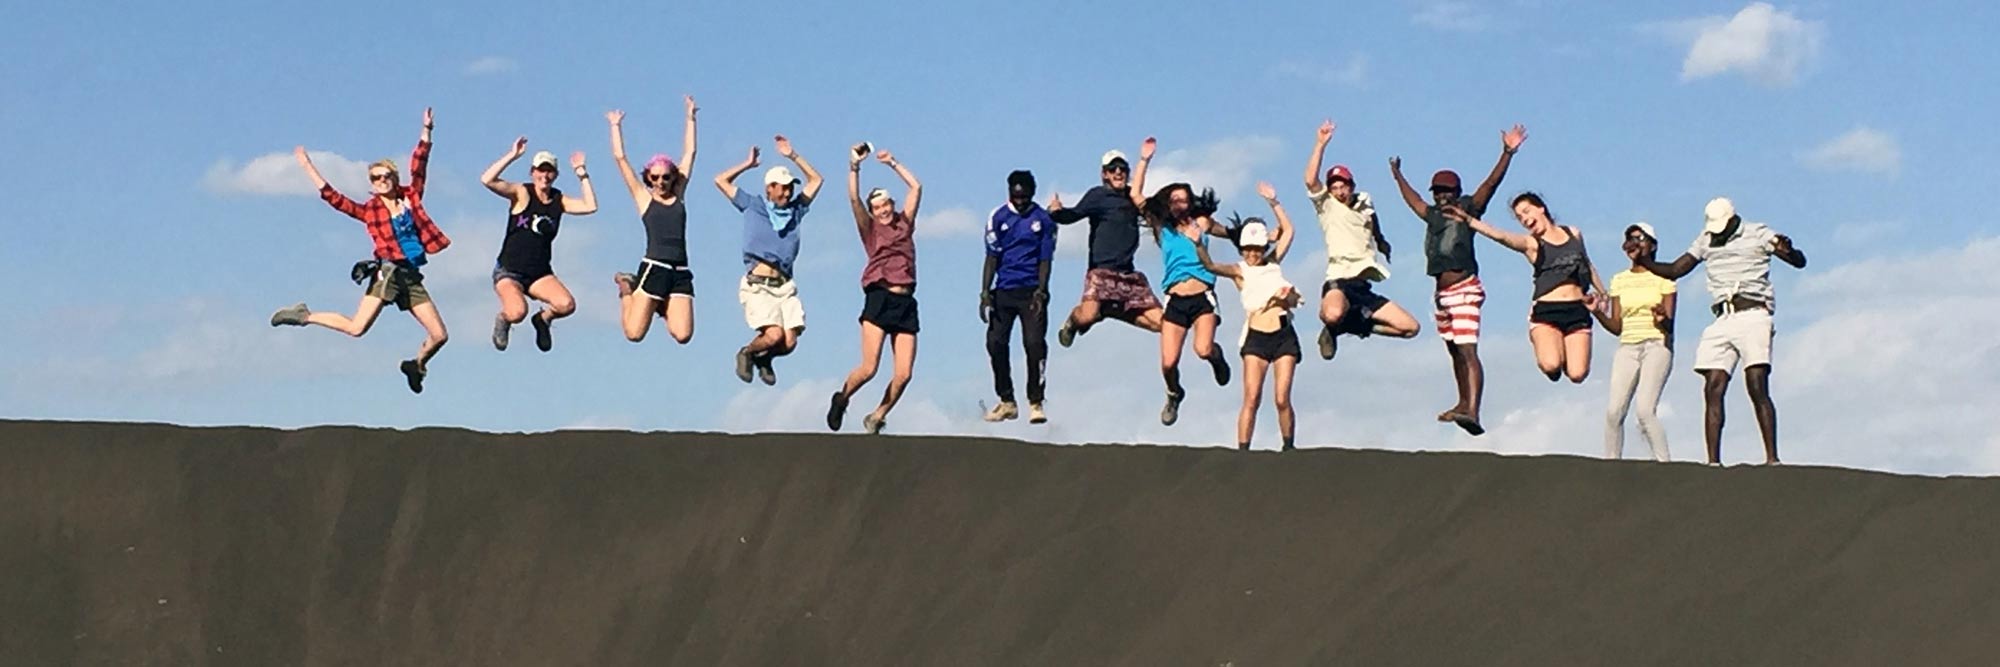 Line of research students jumping for joy